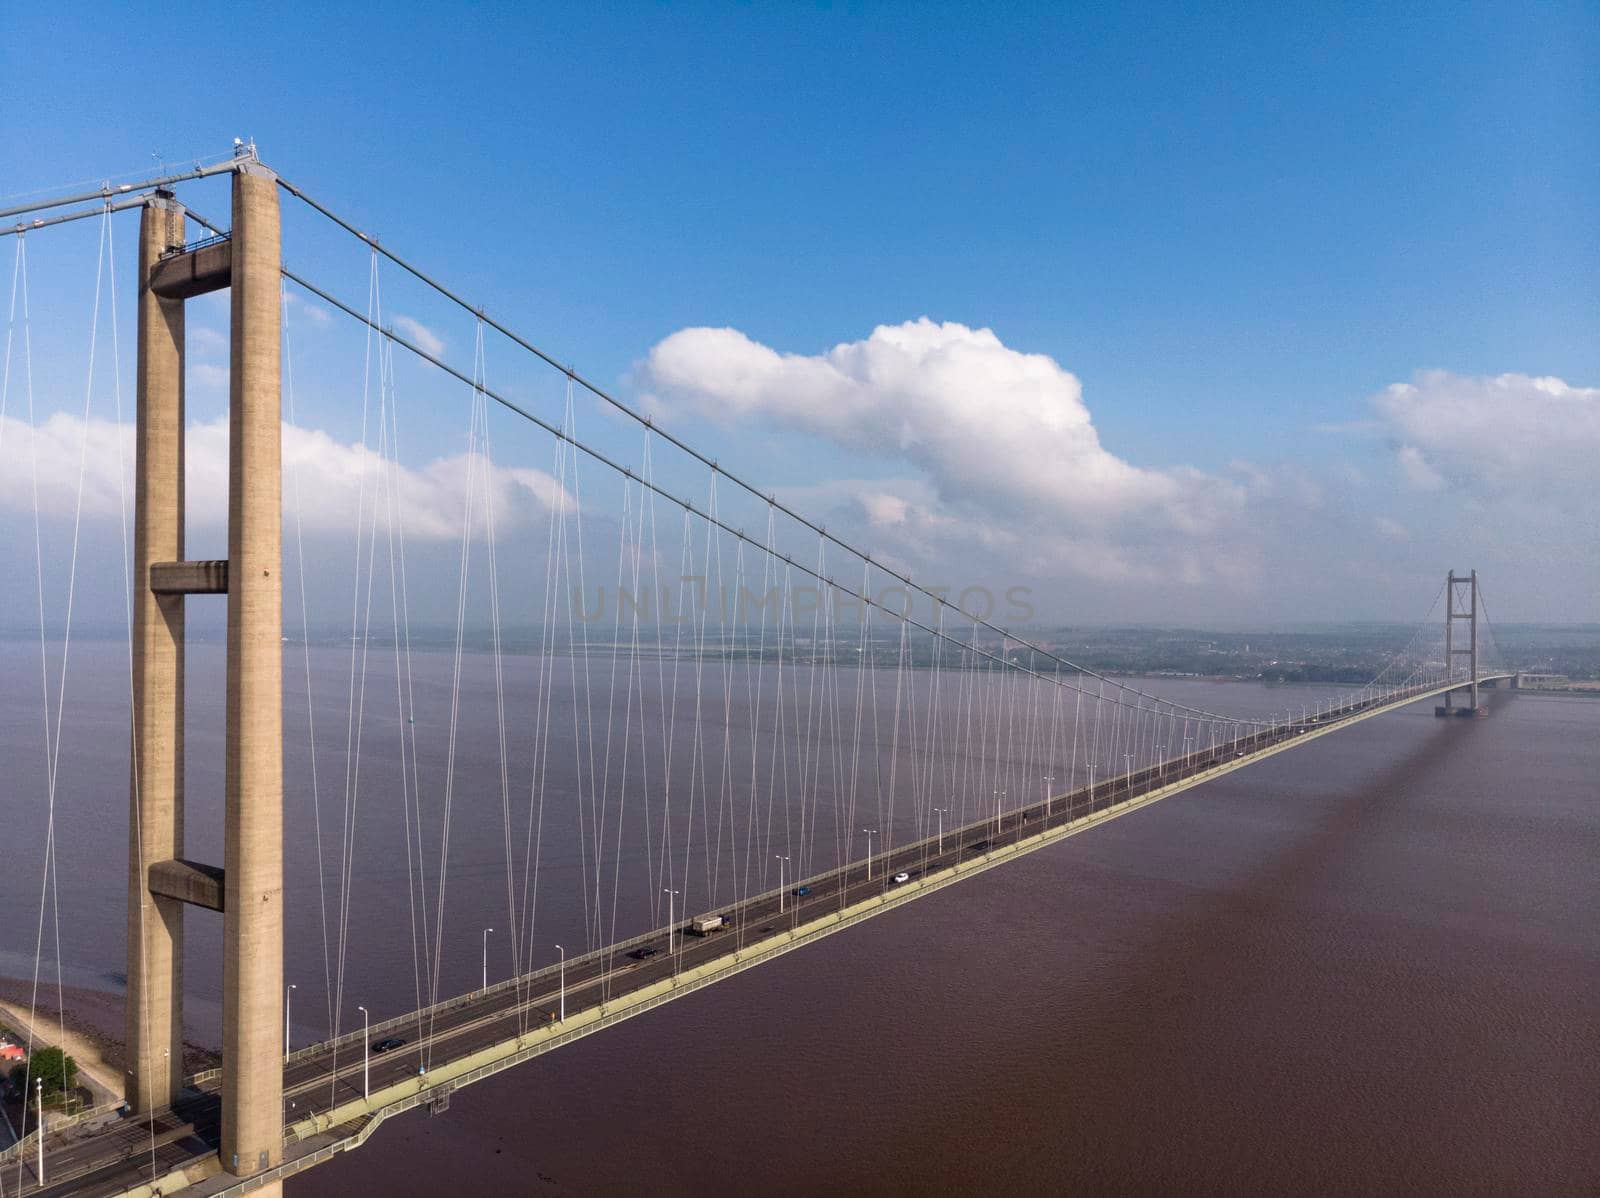 Aerial drone shot above the the Humber single-span suspension bridge (the longest in the world when it opened), against water with blue sky and cumulus clouds. Hessle, Hull, Yorkshire